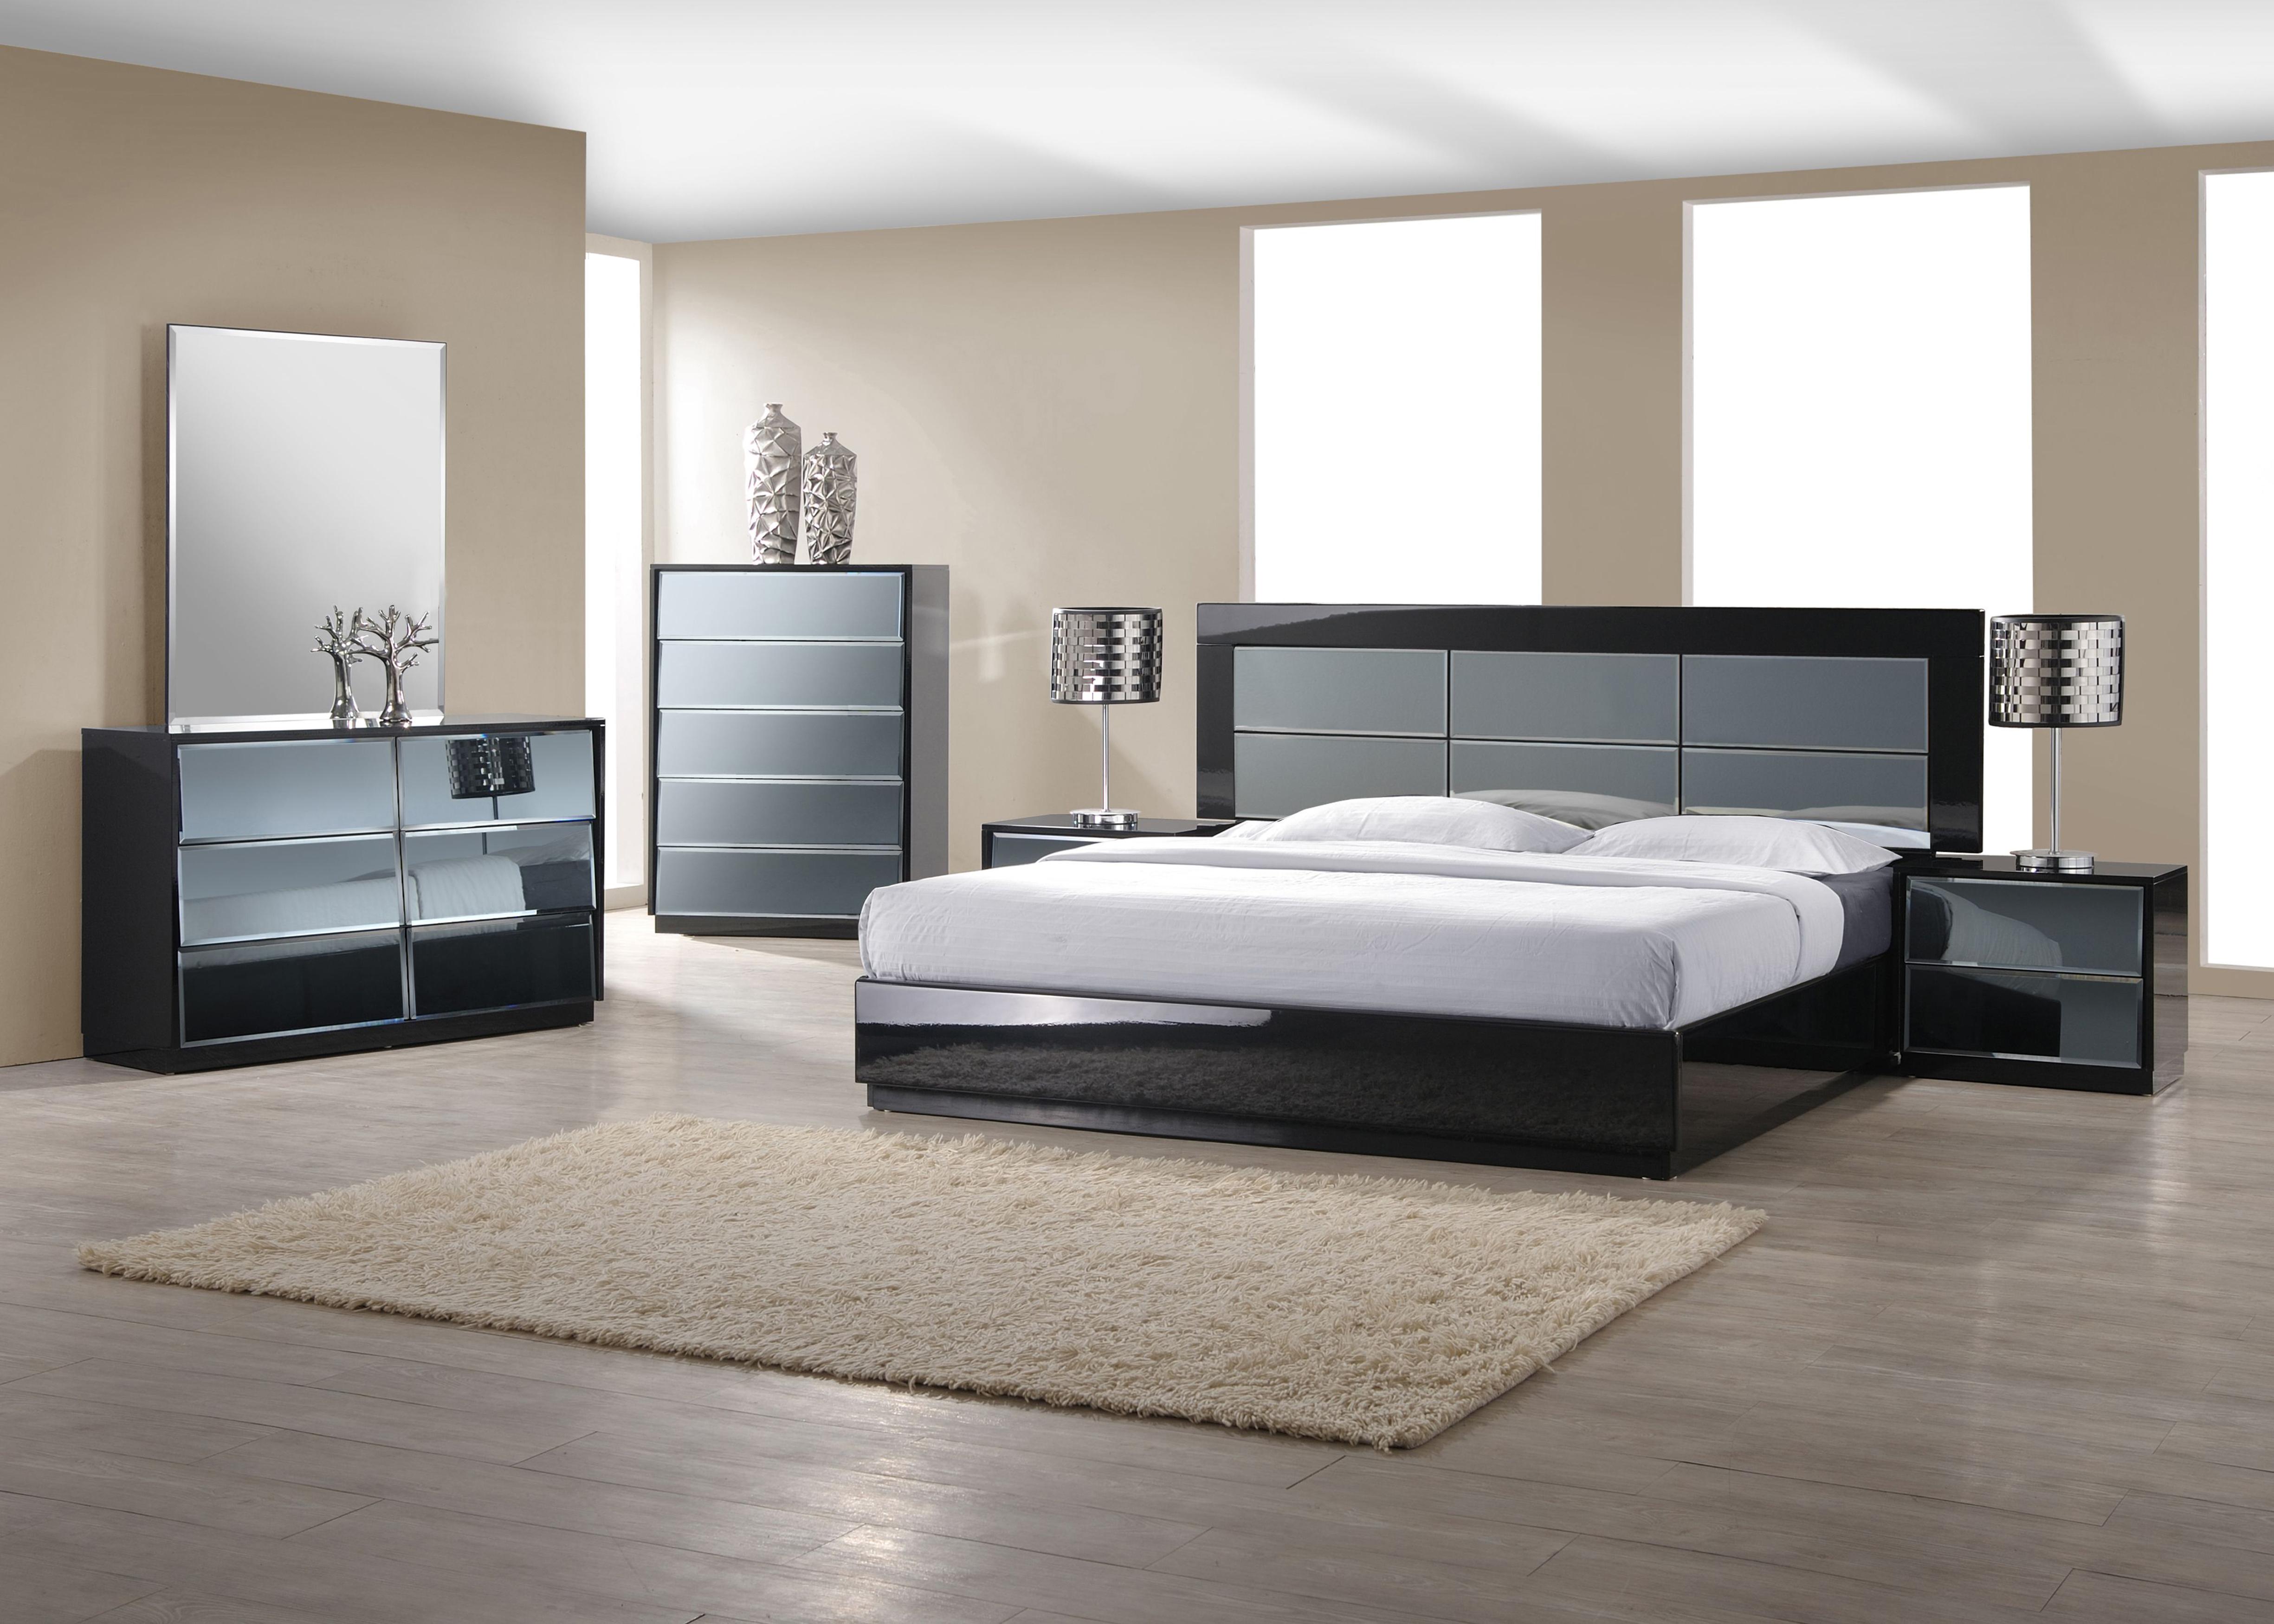 

    
VENICE-QUEEN-2N-3PC Chintaly Imports Platform Bedroom Set
